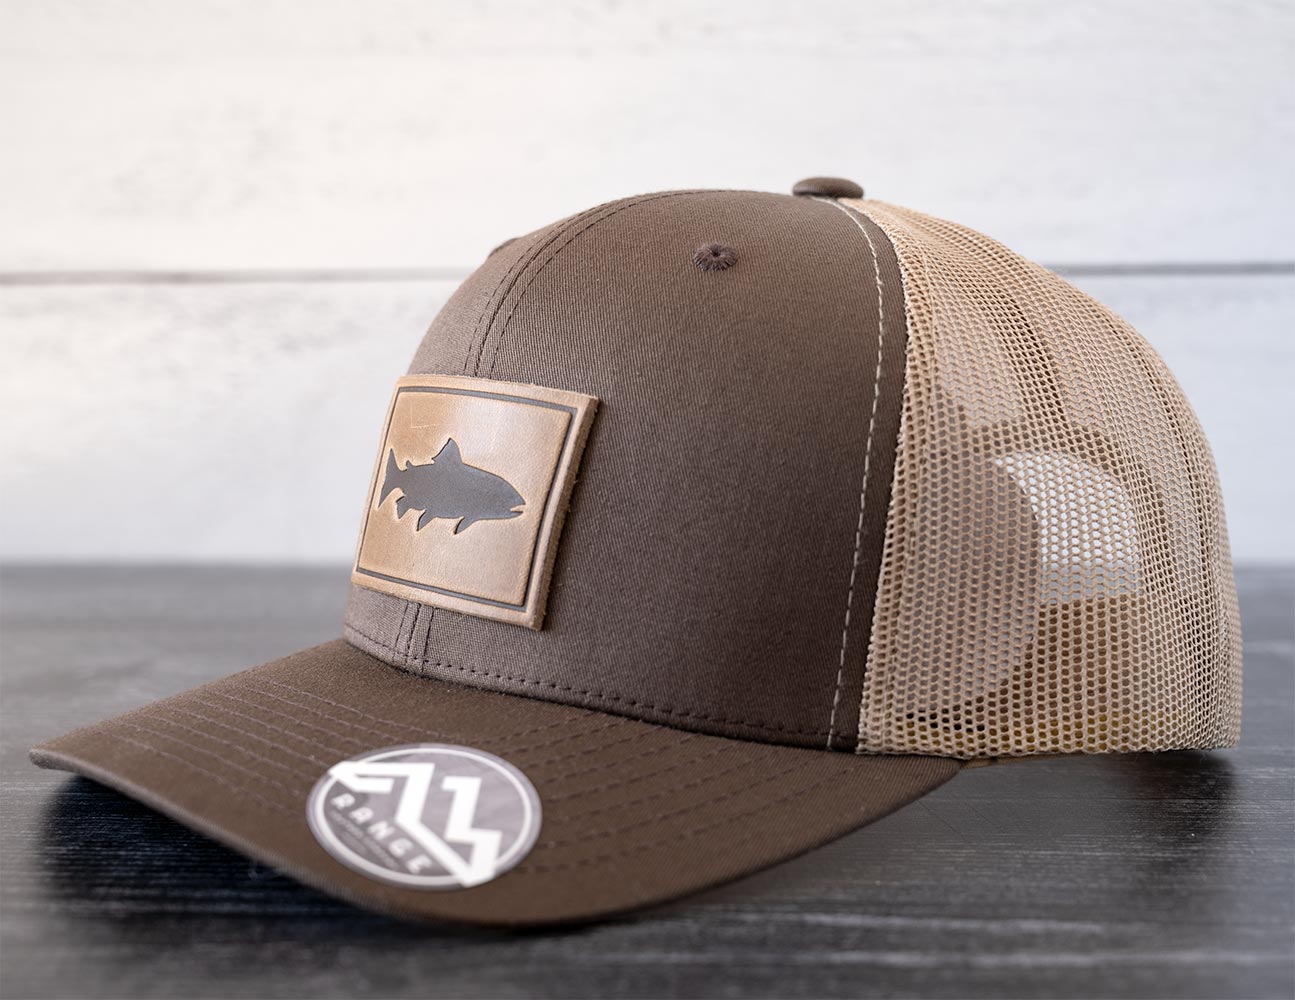 Right Angled View of the RANGE Leather Trout Hat in the Color Brown & Khaki